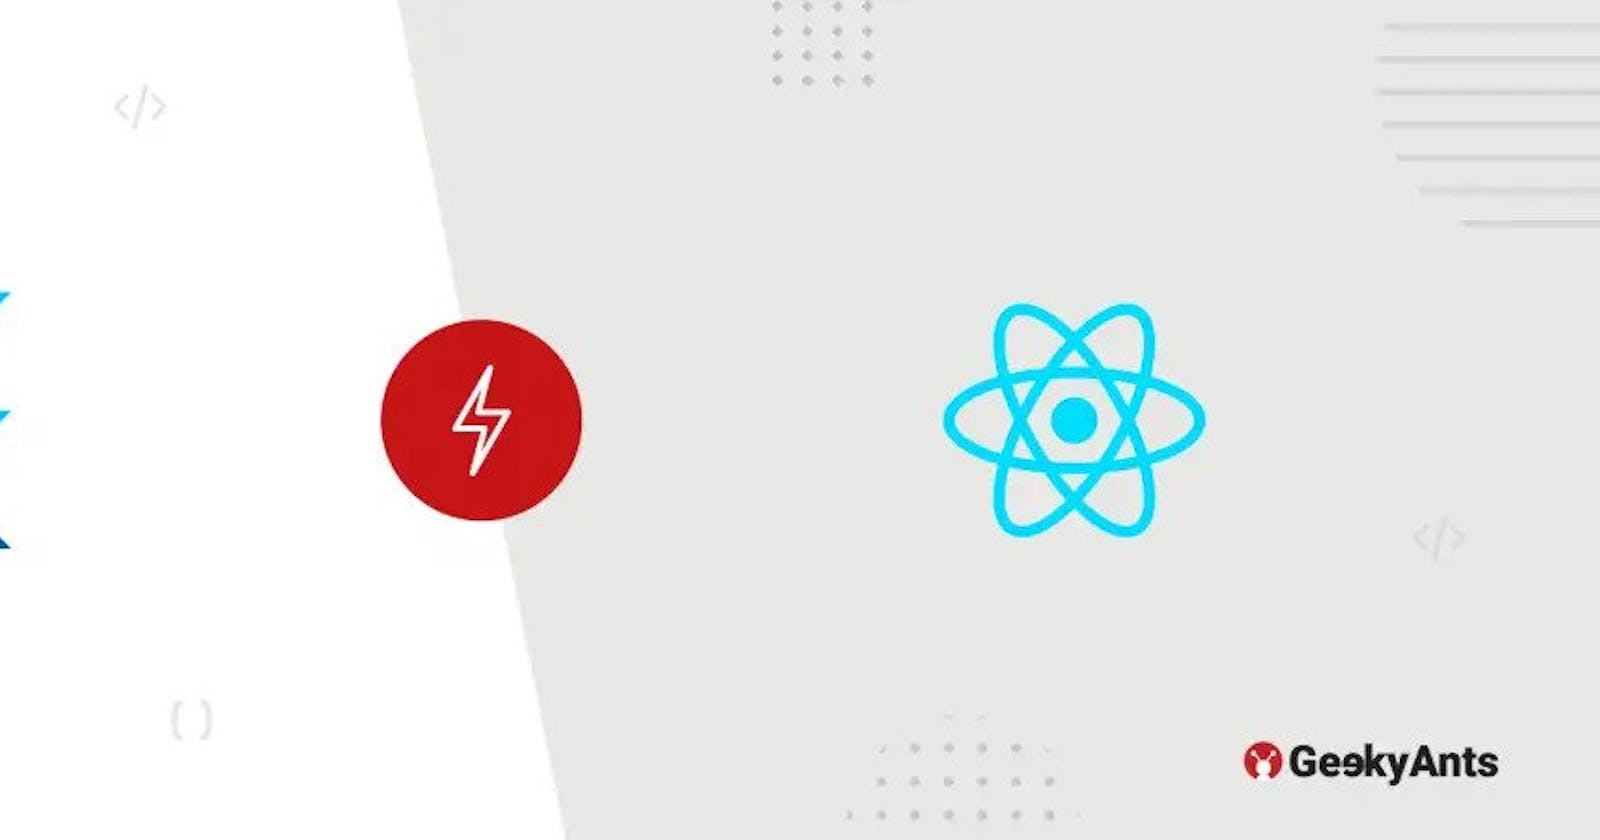 Flutter Vs. React Native In 2022: Which One To Choose?